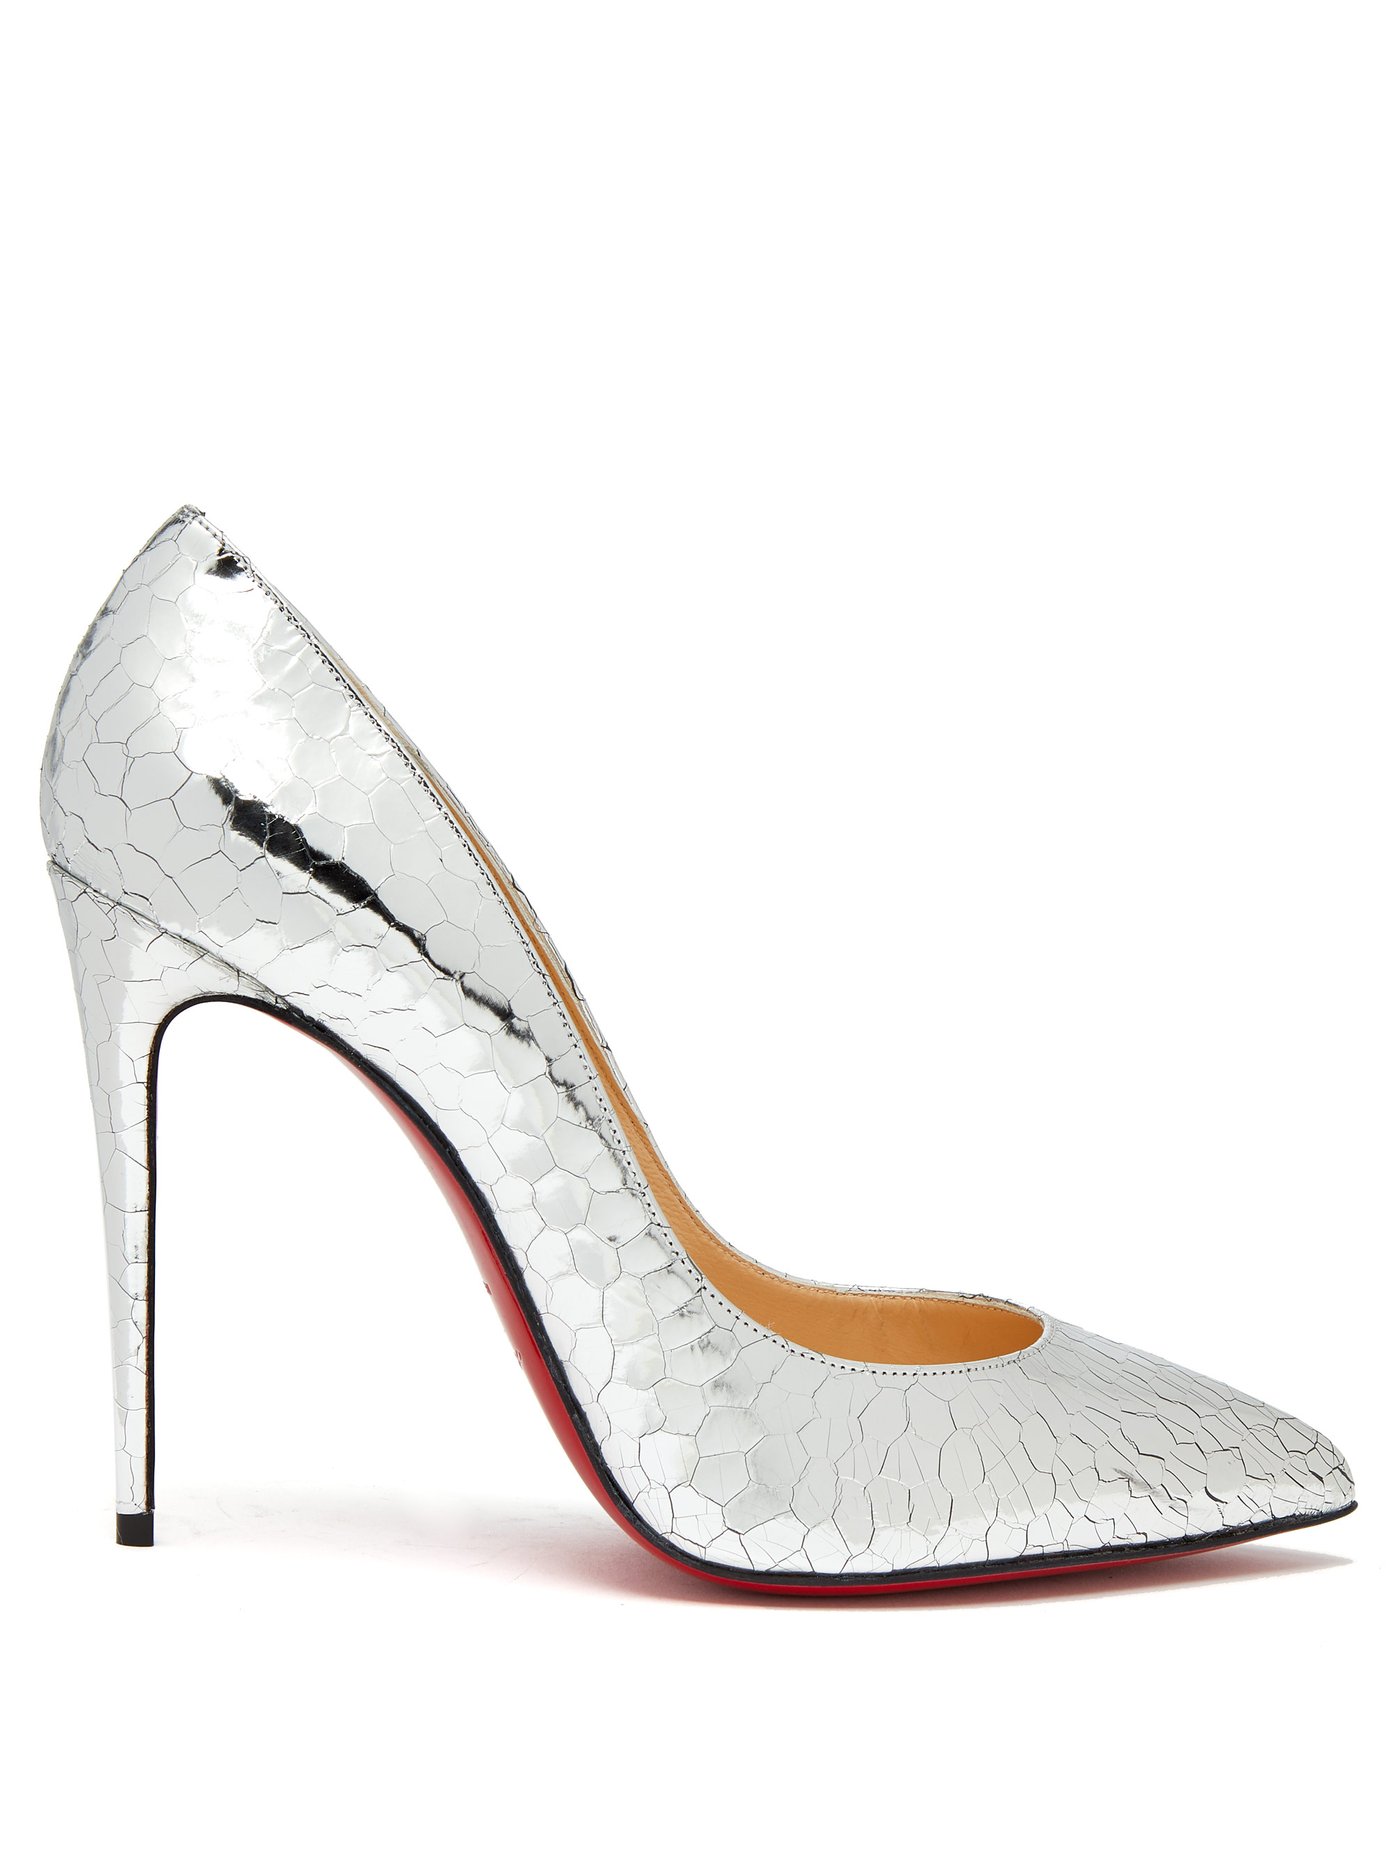 christian louboutin 12 pigalle